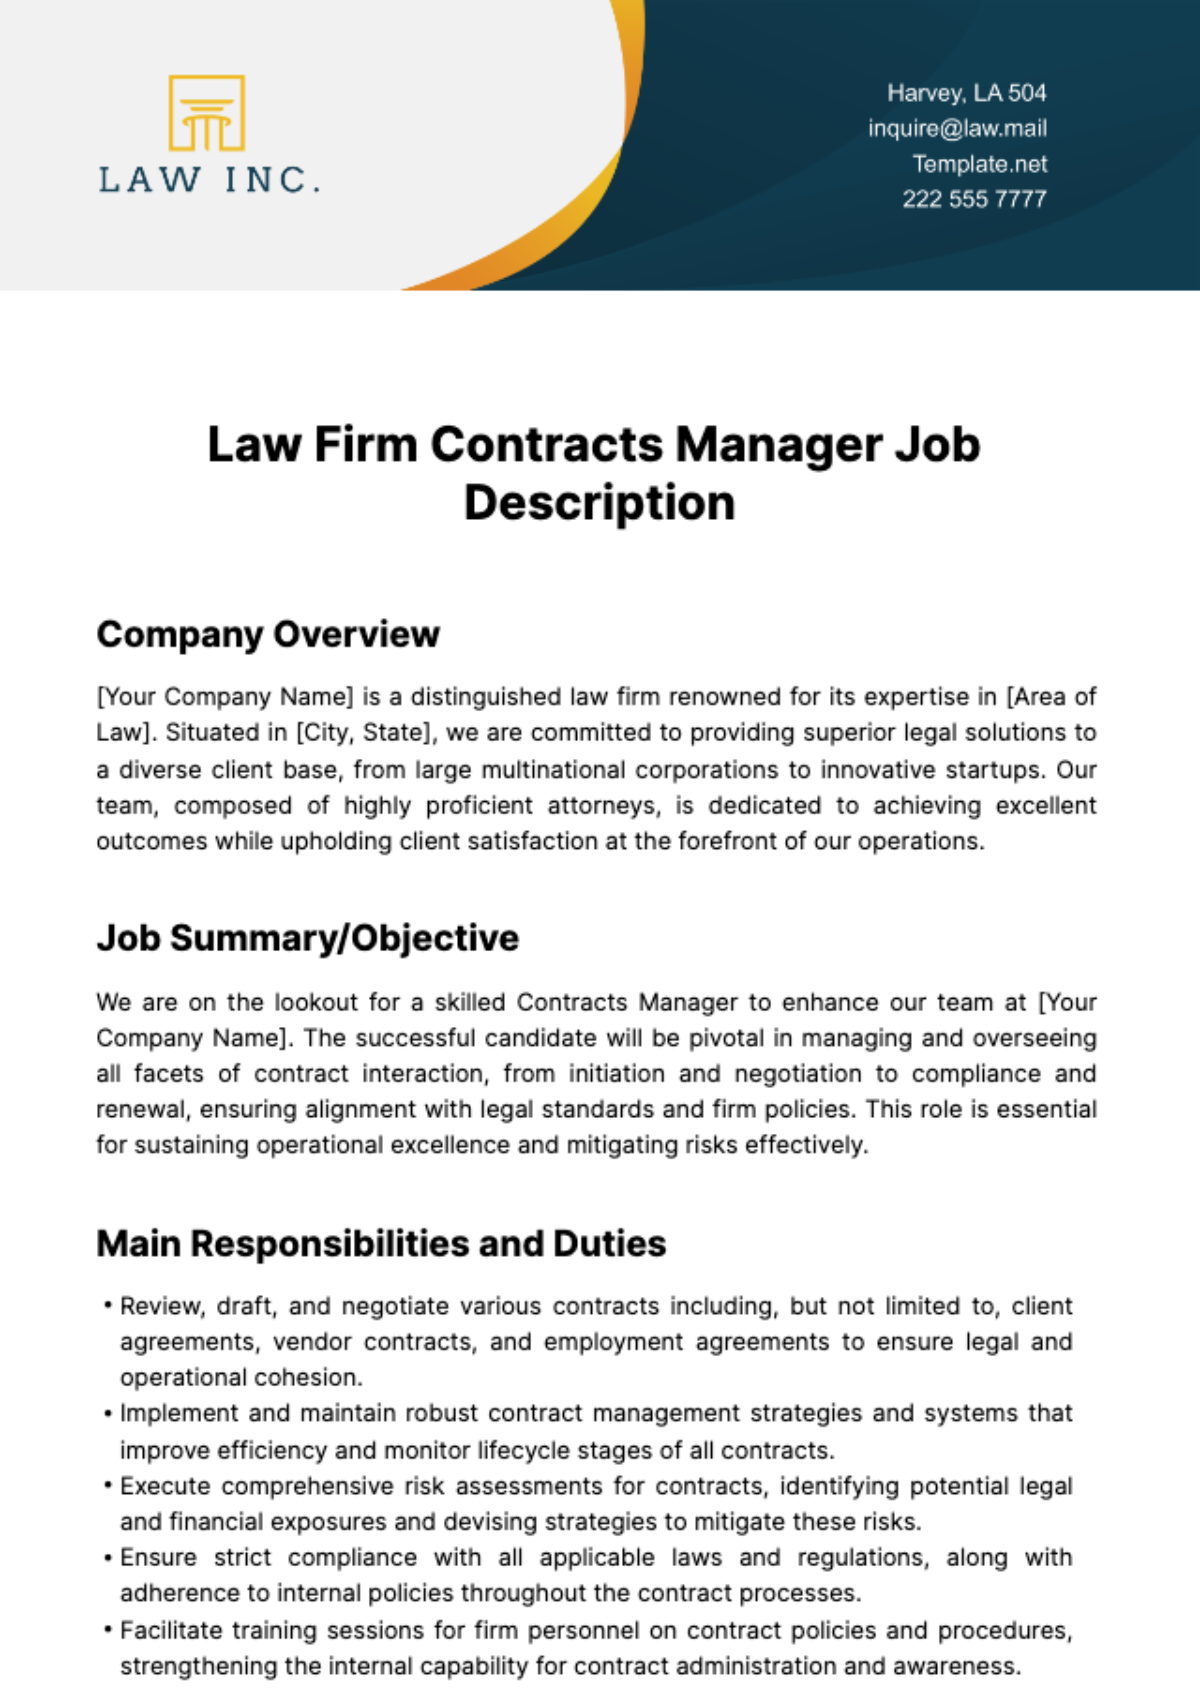 Free Law Firm Contracts Manager Job Description Template